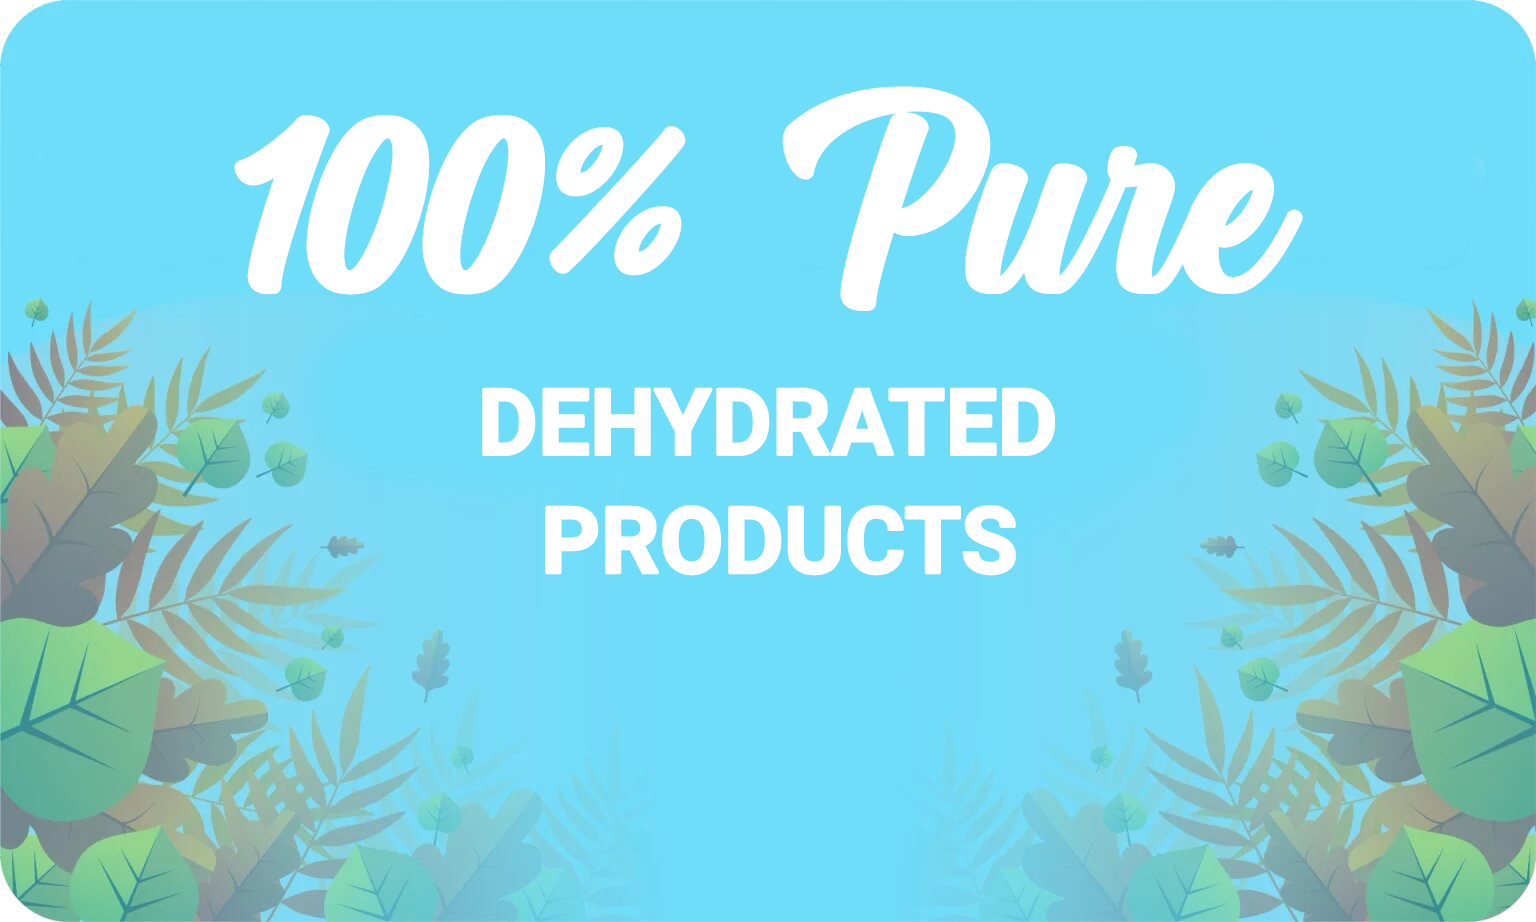 100% pure dehydrated products